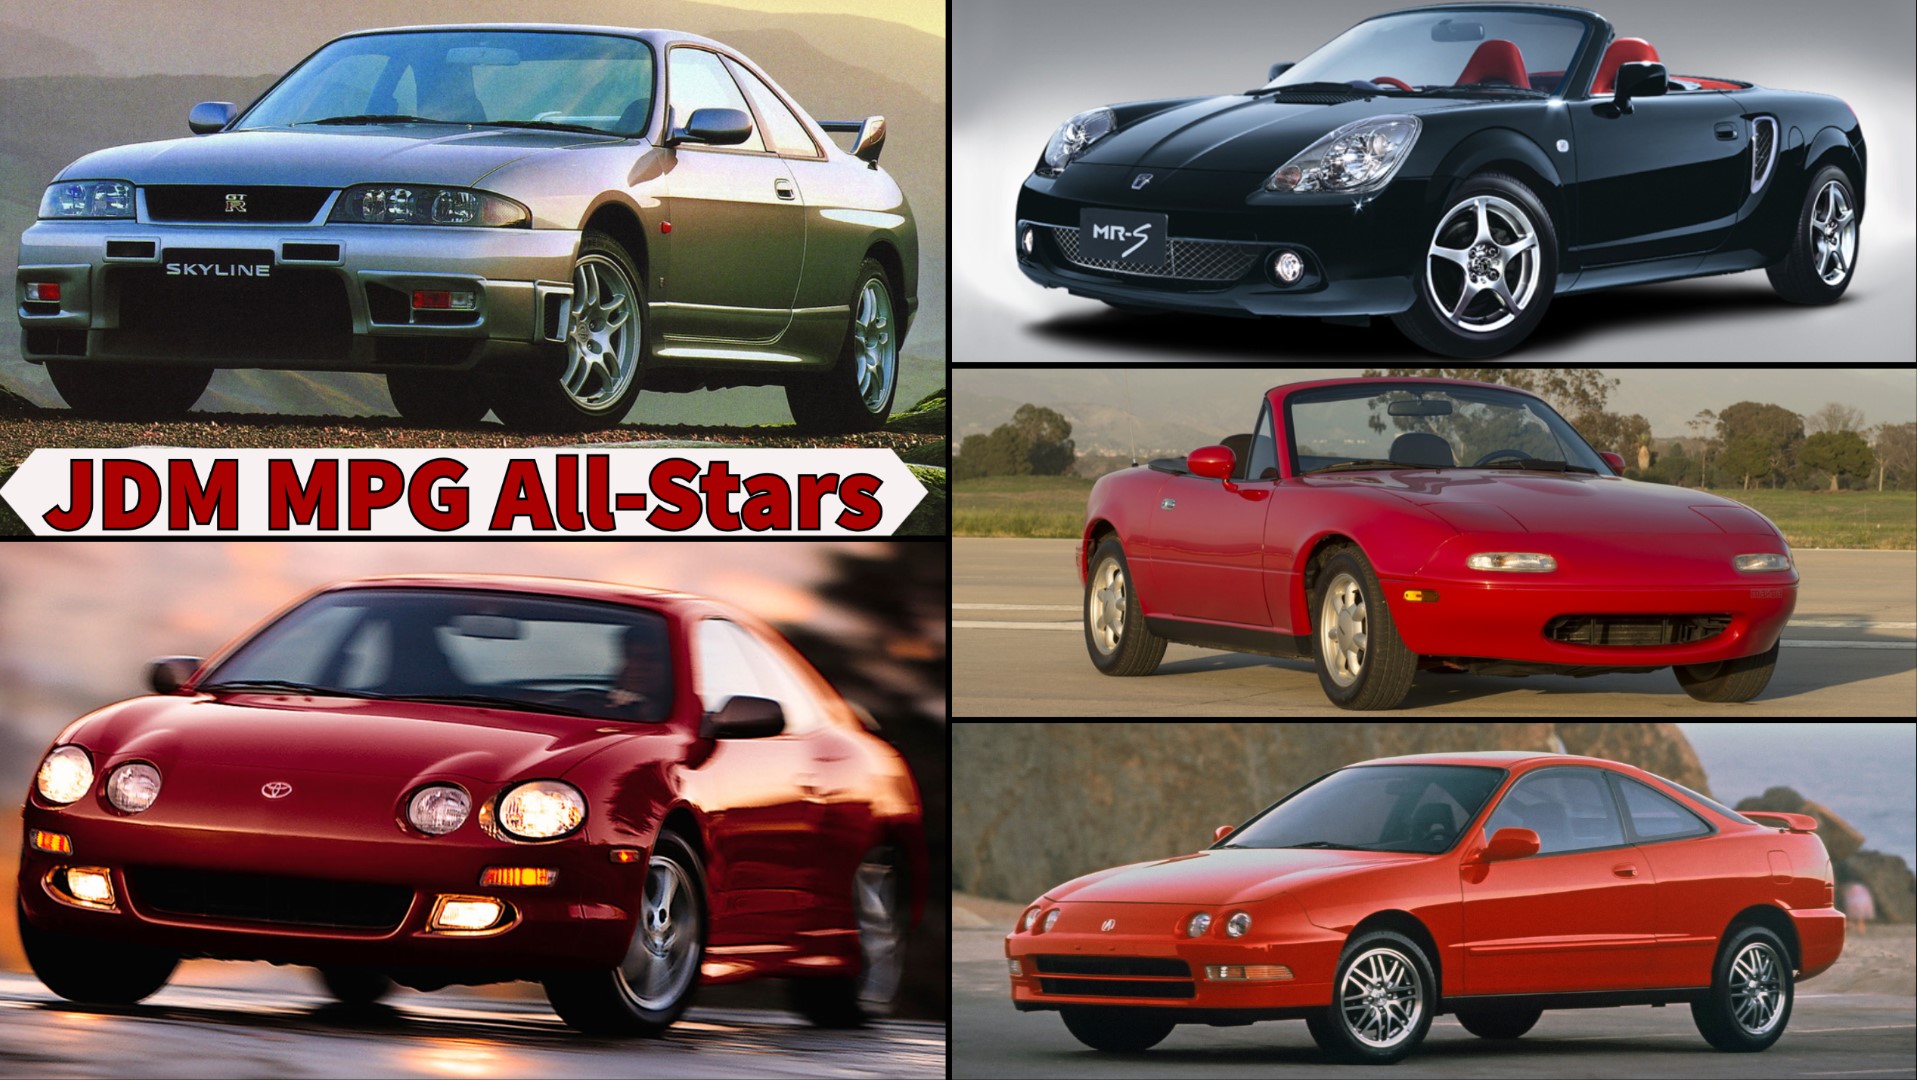 What Is A JDM Car?